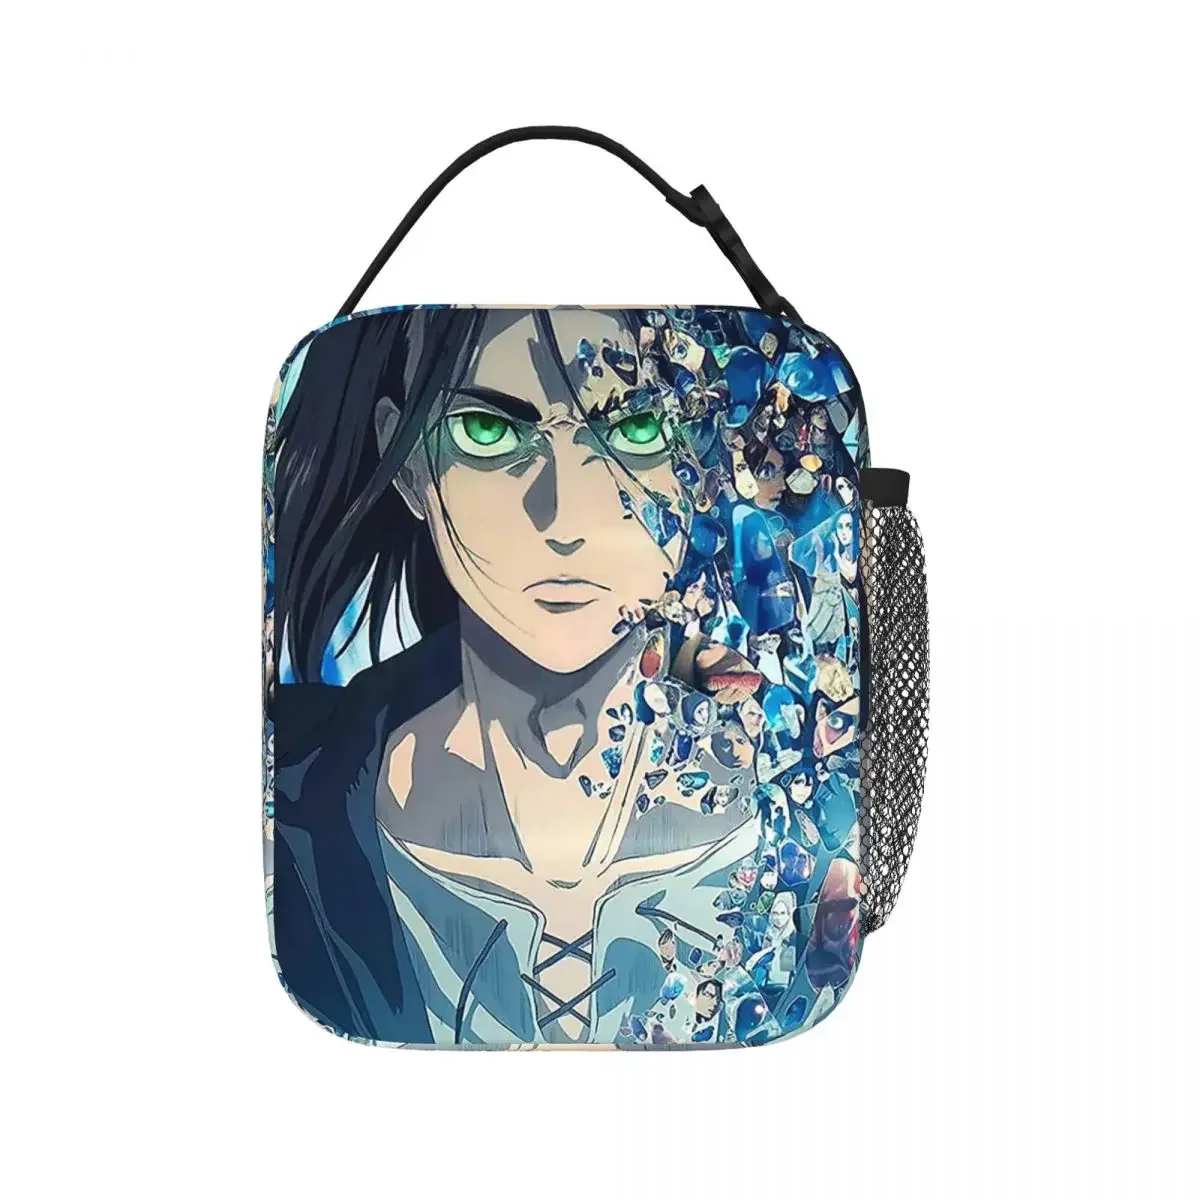 

Serial Anime Lunch Bags Insulated Lunch Tote Portable Thermal Bag Resuable Picnic Bags for Woman Work Children School